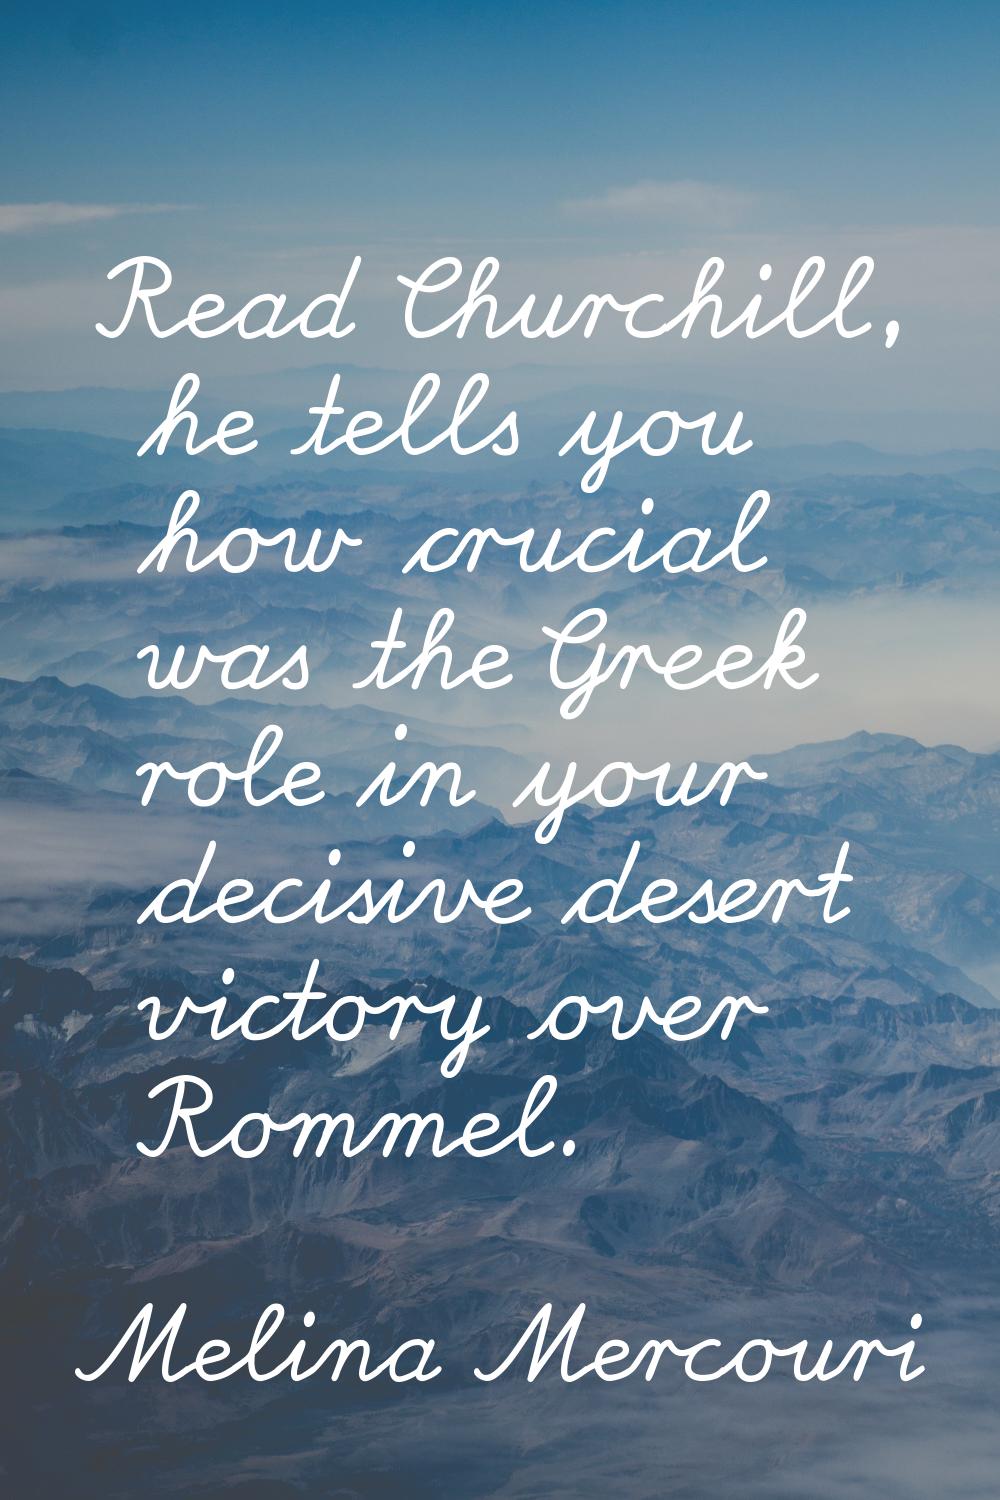 Read Churchill, he tells you how crucial was the Greek role in your decisive desert victory over Ro